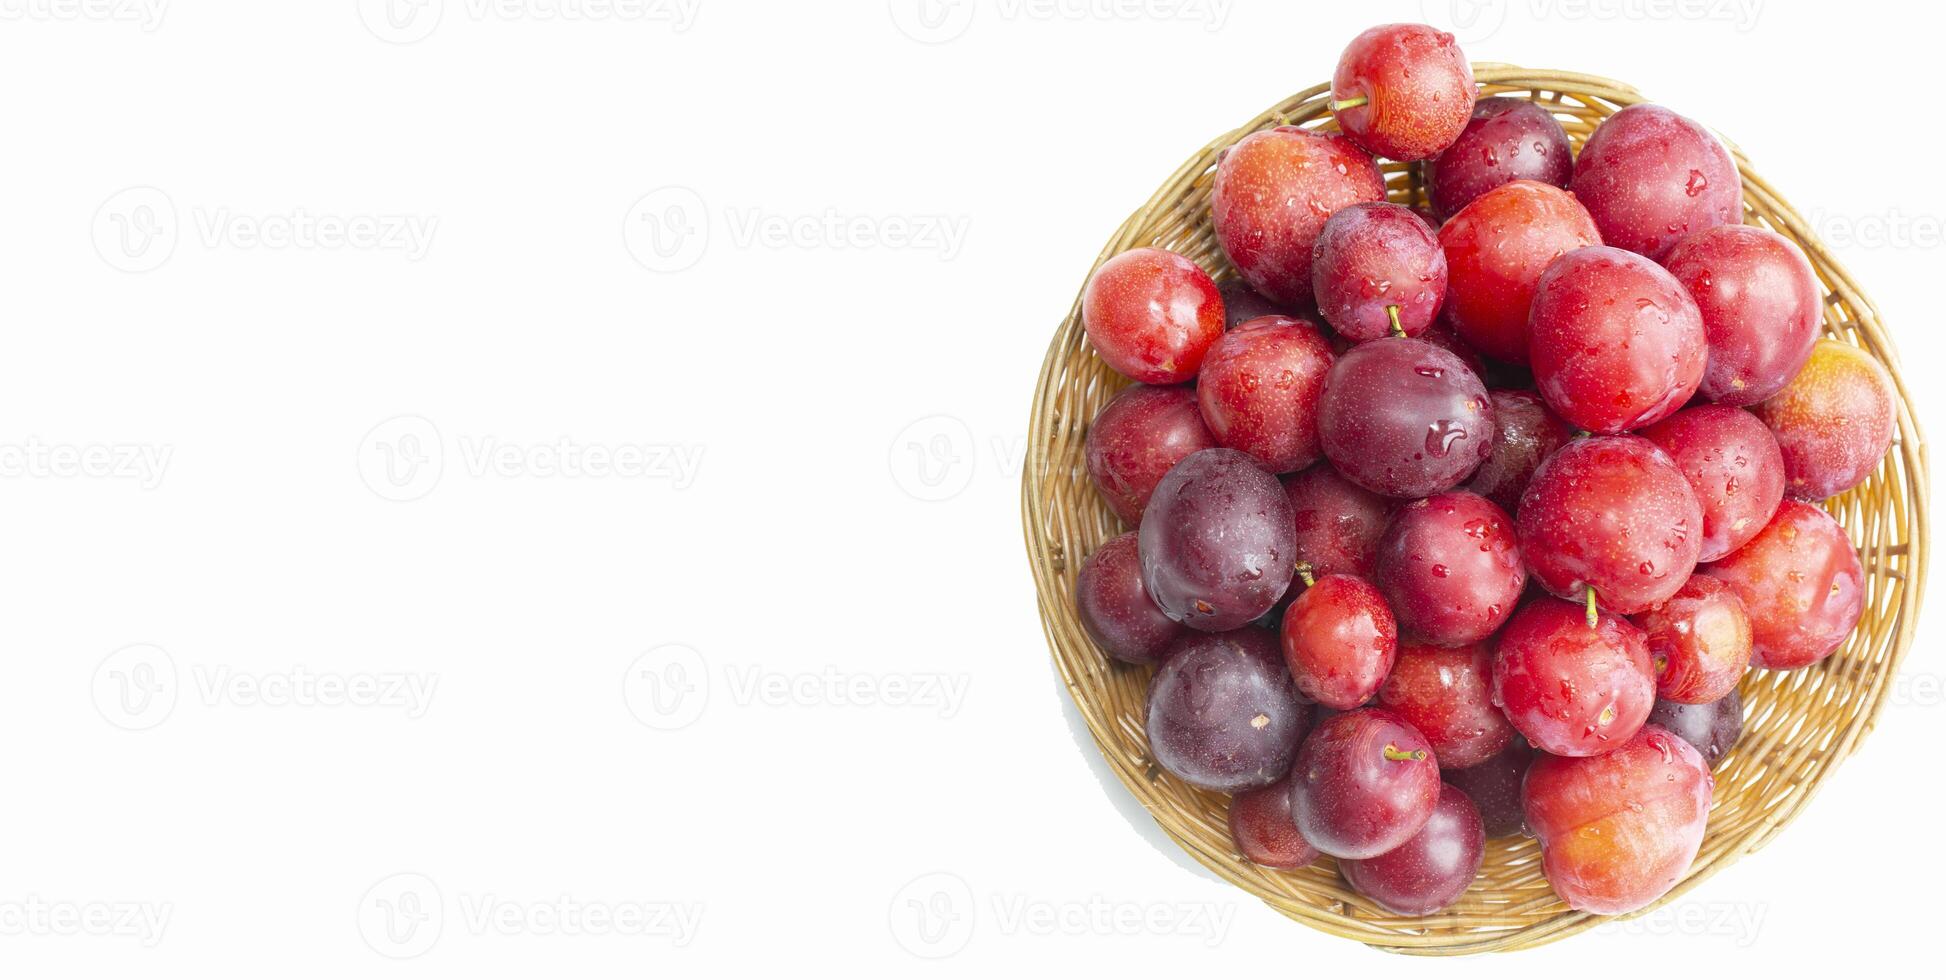 Plums in the basket top view on a white background photo